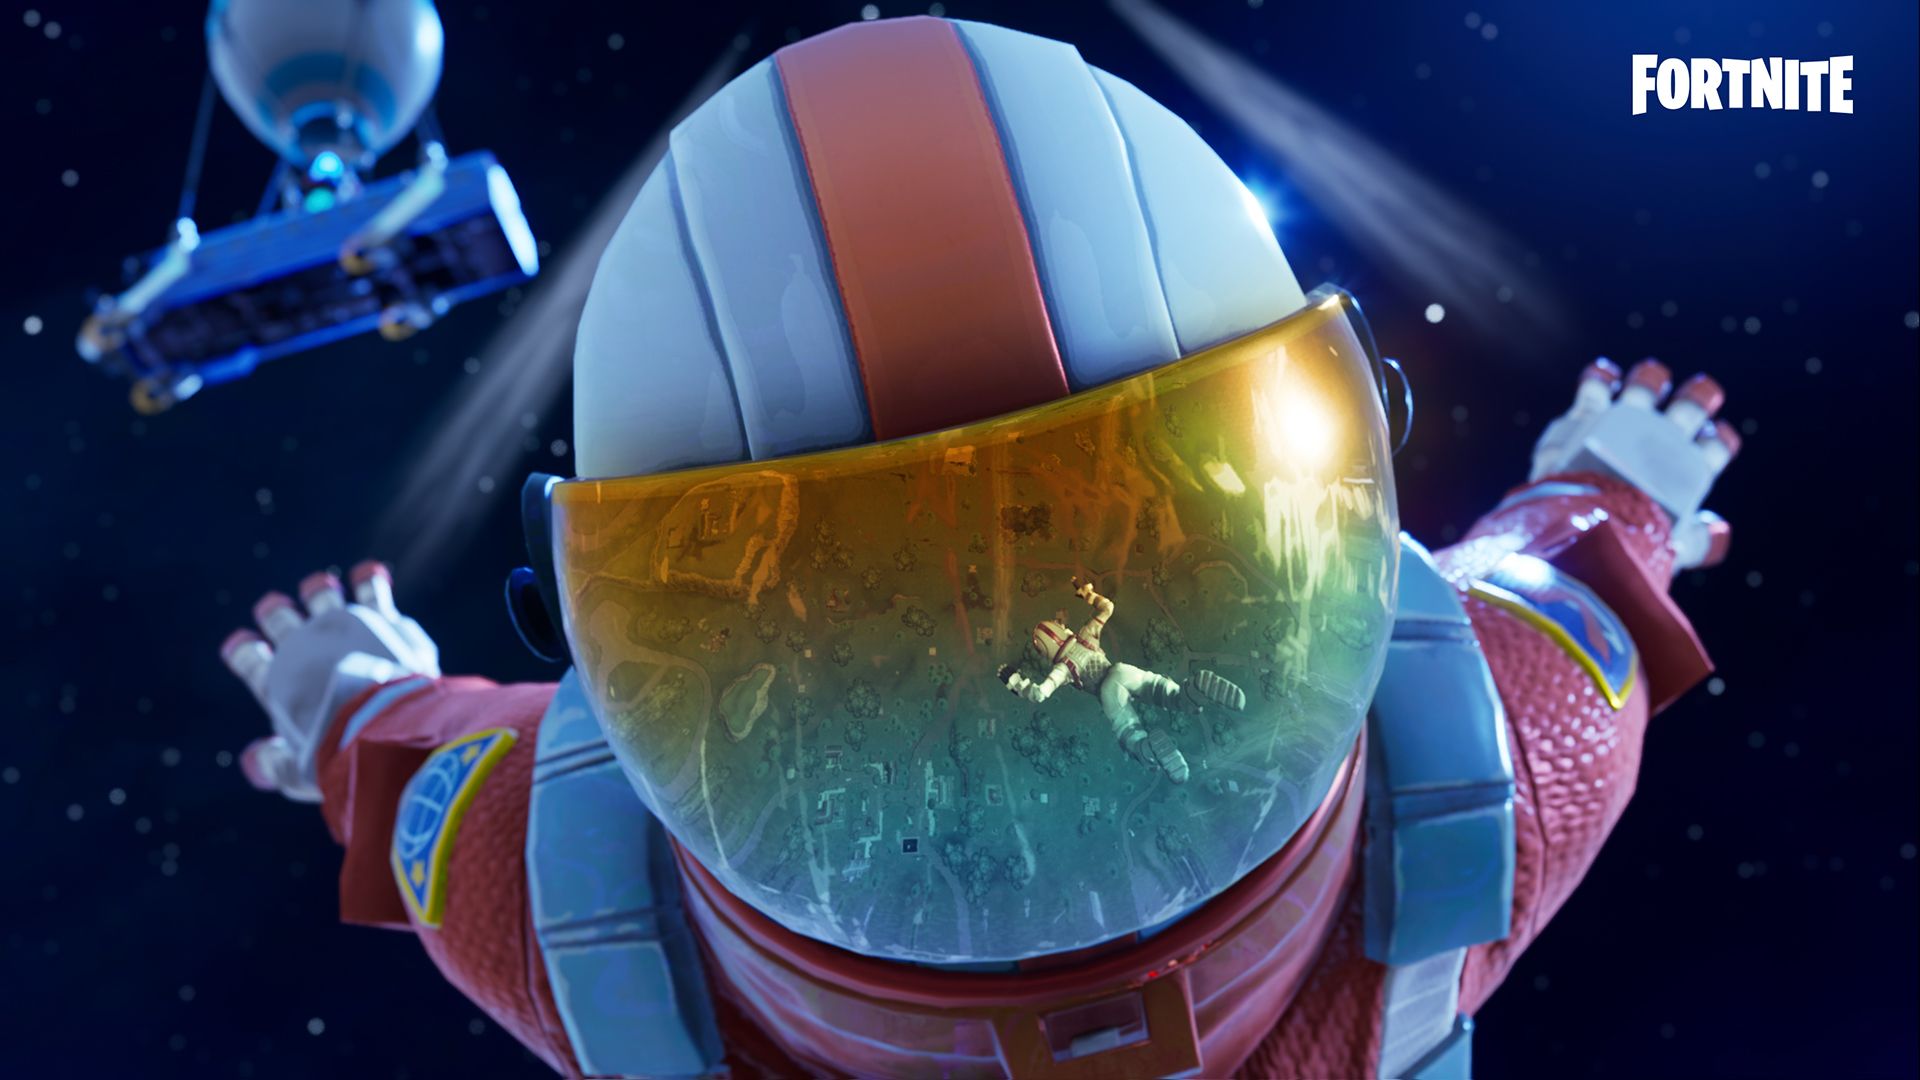 Mission Specialist Fortnite Outfit Skin How to Get + Unlock